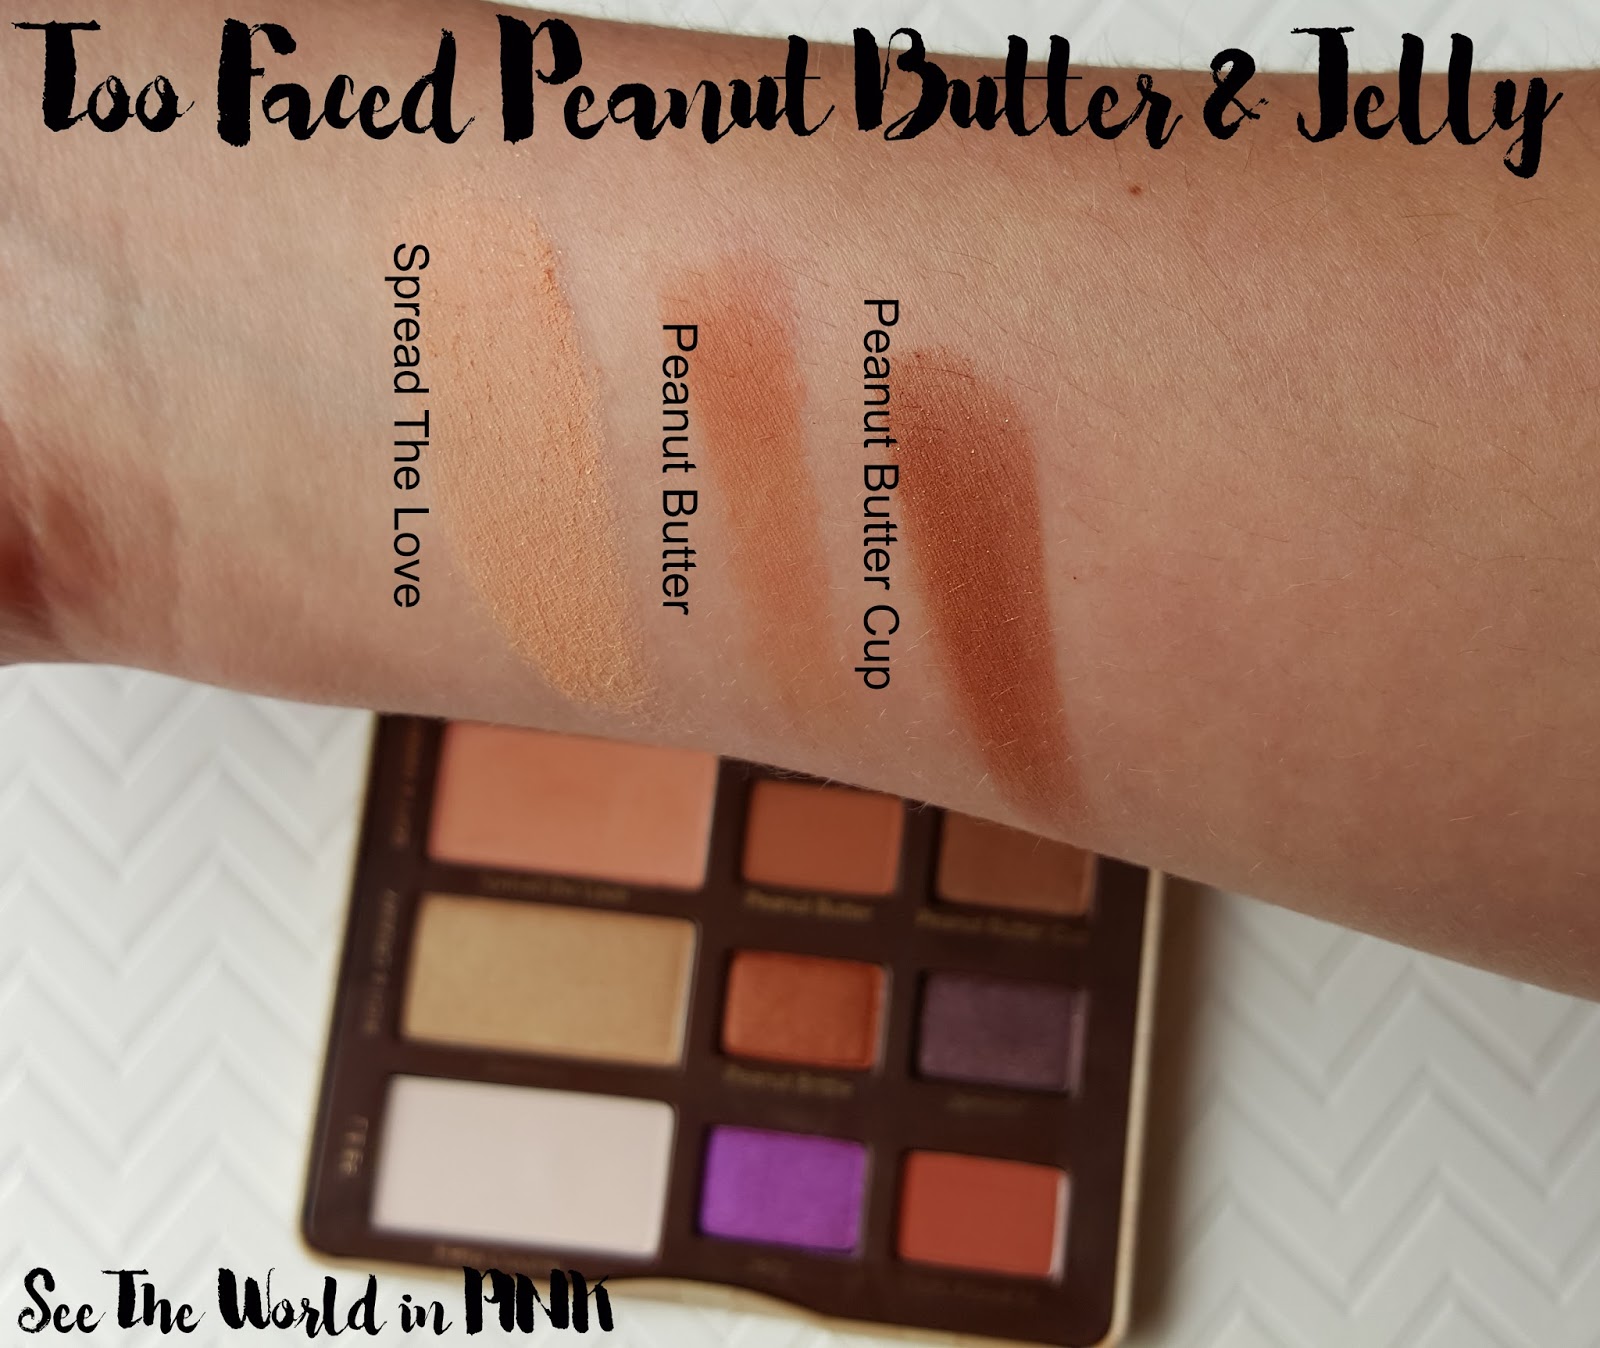 Too Faced Peanut Butter and Jelly Palette - Review, Swatches and a Makeup Look! 